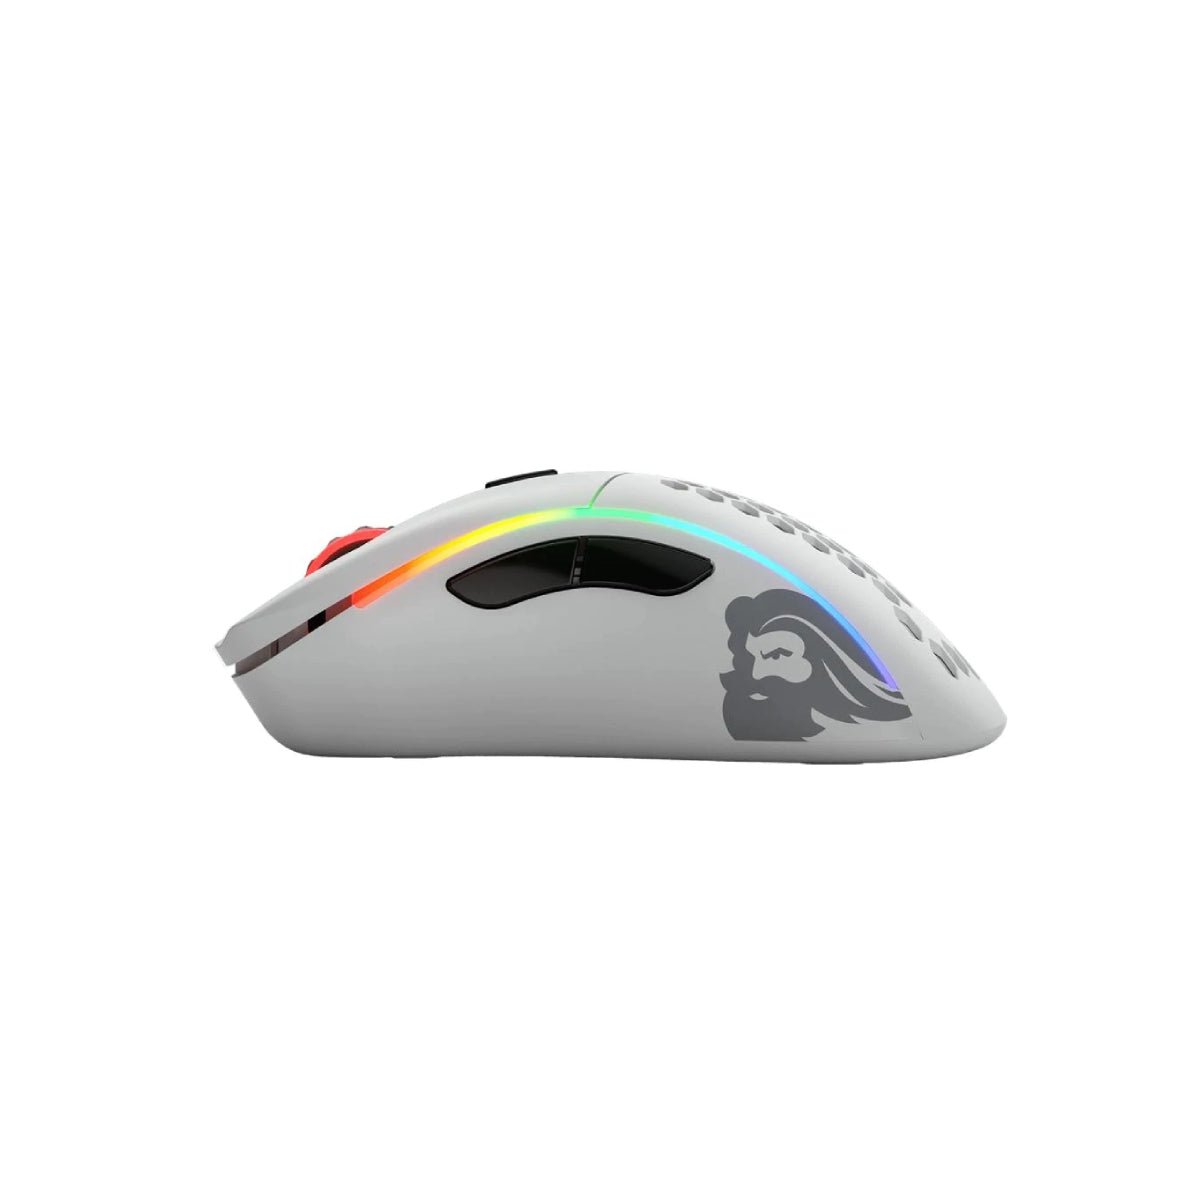 Glorious Model D Minus Wireless Gaming Mouse - Matte White - Store 974 | ستور ٩٧٤